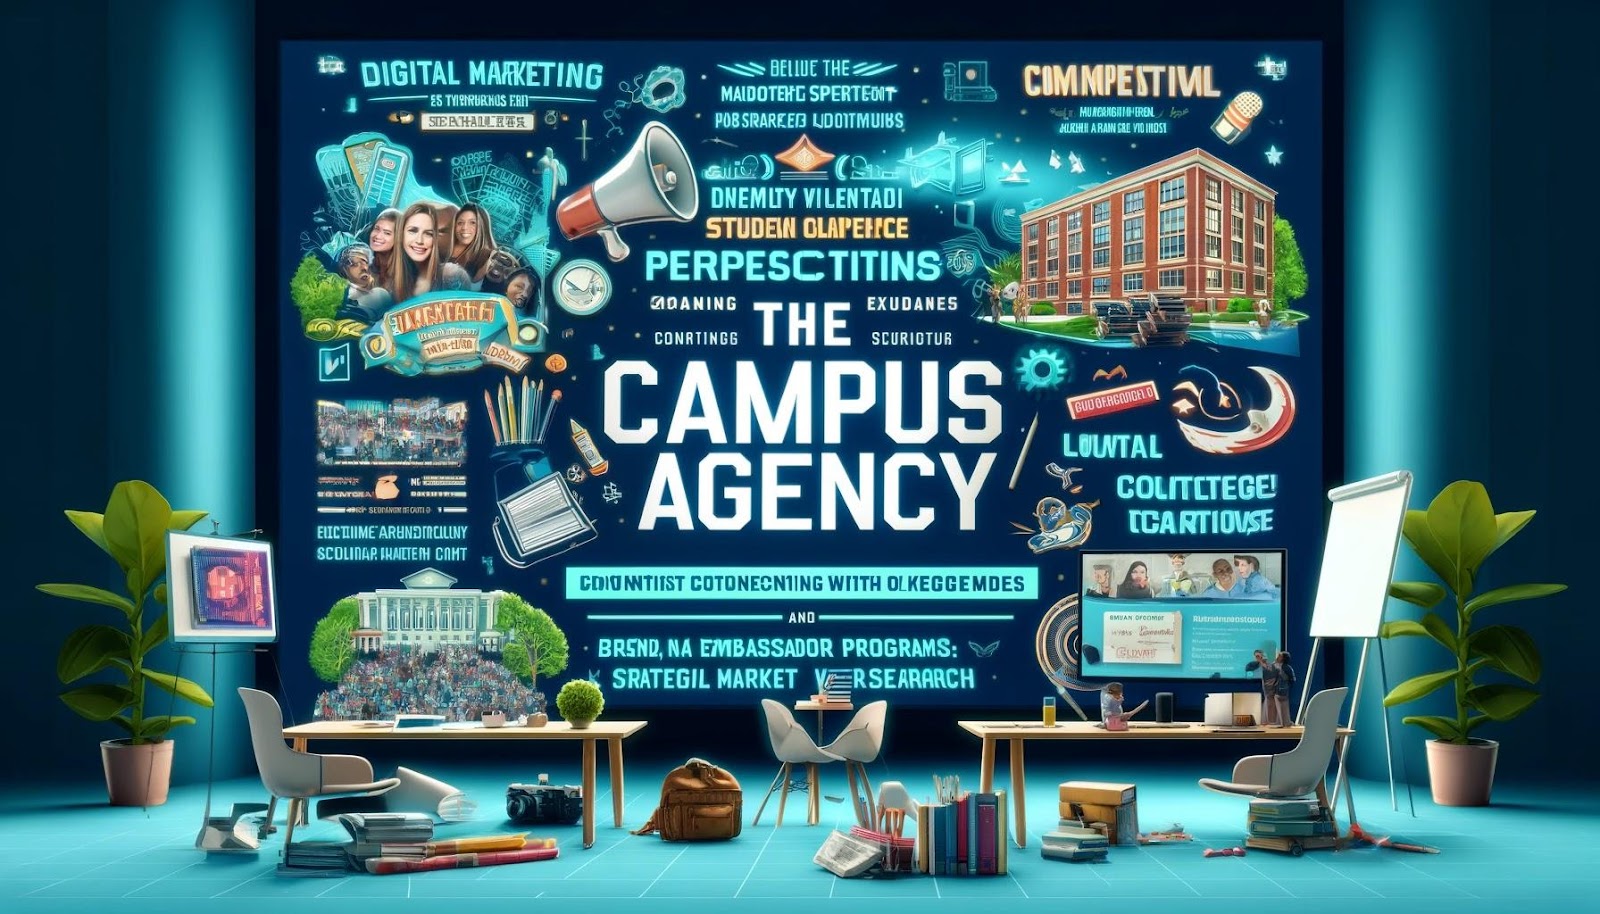 A widescreen image representing The Campus Agency, a premier marketing agency specialized in connecting brands with the college market. The design should emphasize dynamic and relevant student experiences. Include elements suggesting a wide range of services like digital marketing, brand ambassador programs, social media management, content creation, and strategic market research. Also, highlight their history of successful partnerships with various brands and include visual representations of client success stories. The overall style should be vibrant and engaging, reflecting the youthful and energetic college market they cater to.

independent schools, right marketing agency, online display advertising, marketing budgets, content management system, fashion institute, web services, user research, enrollment targets, higher ed space, current students, brand platforms